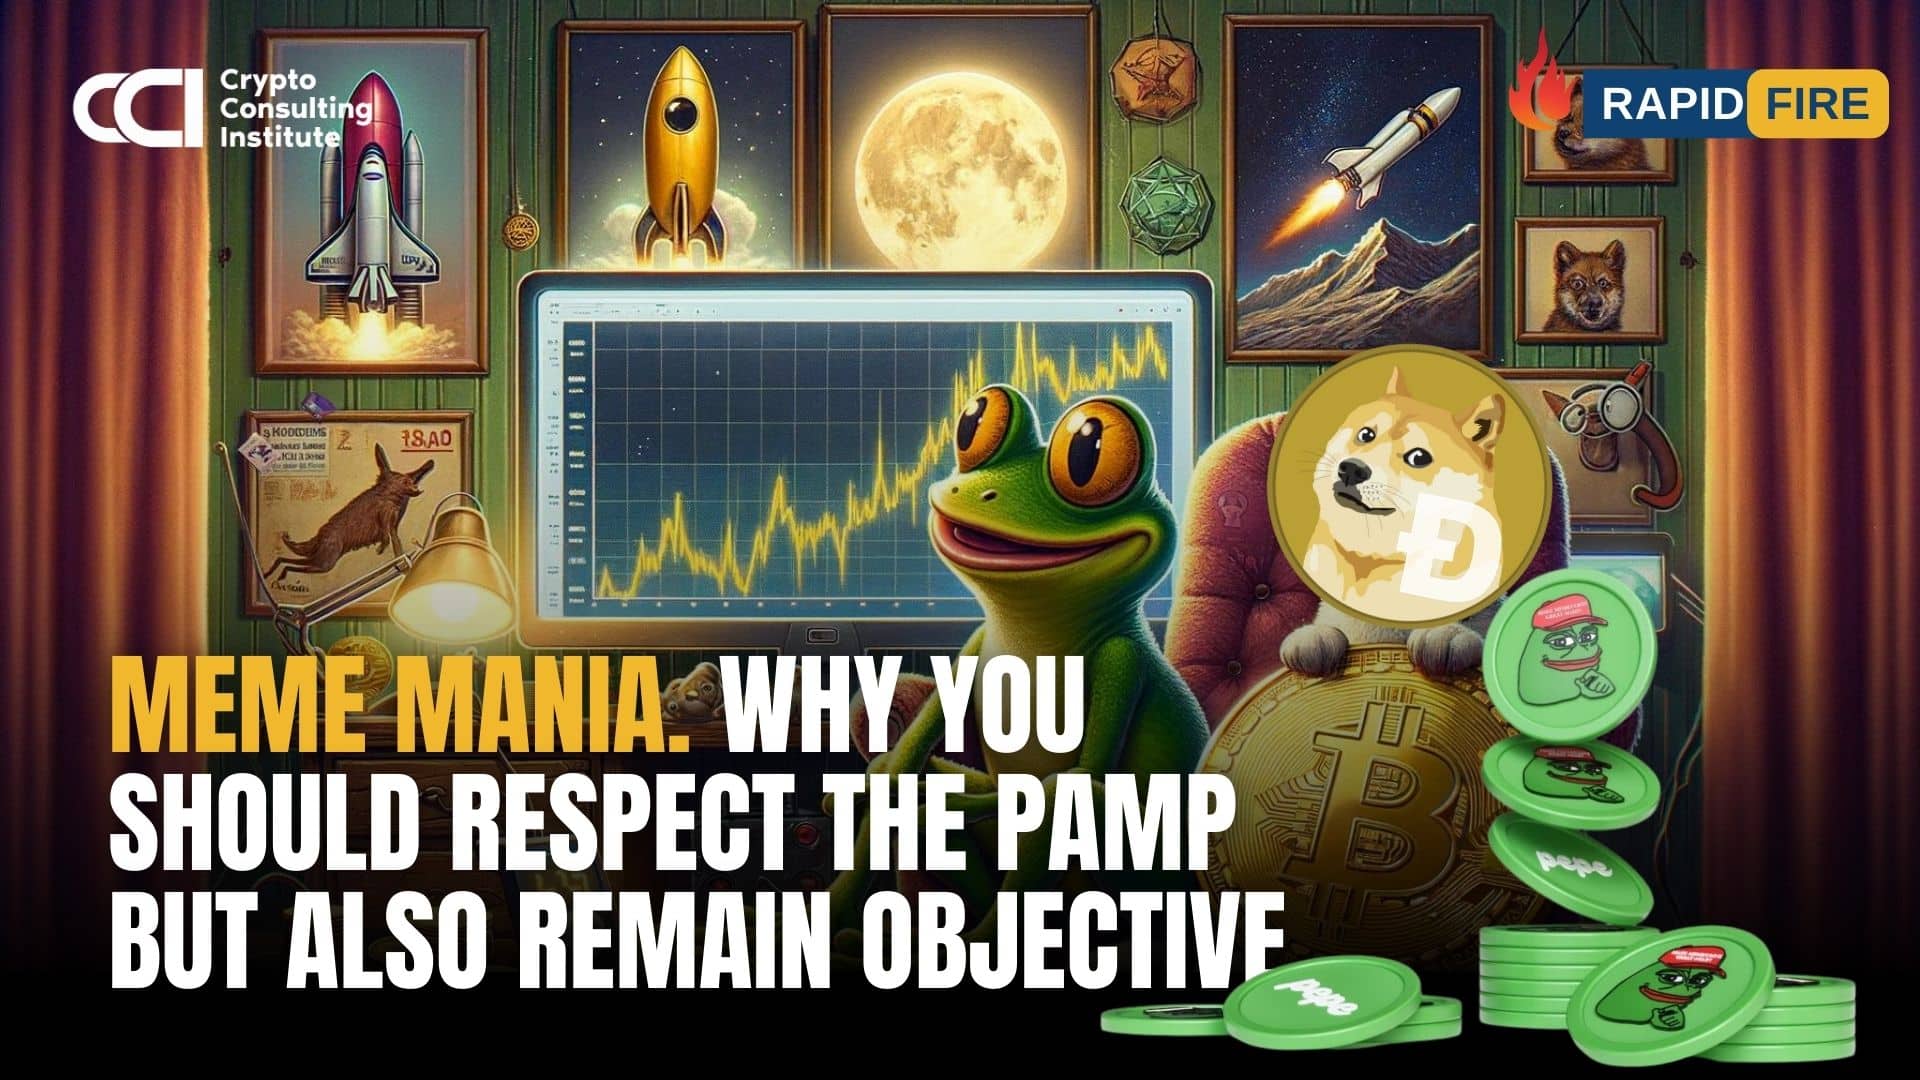 MEME MANIA. Why you should respect the pamp but also remain objective